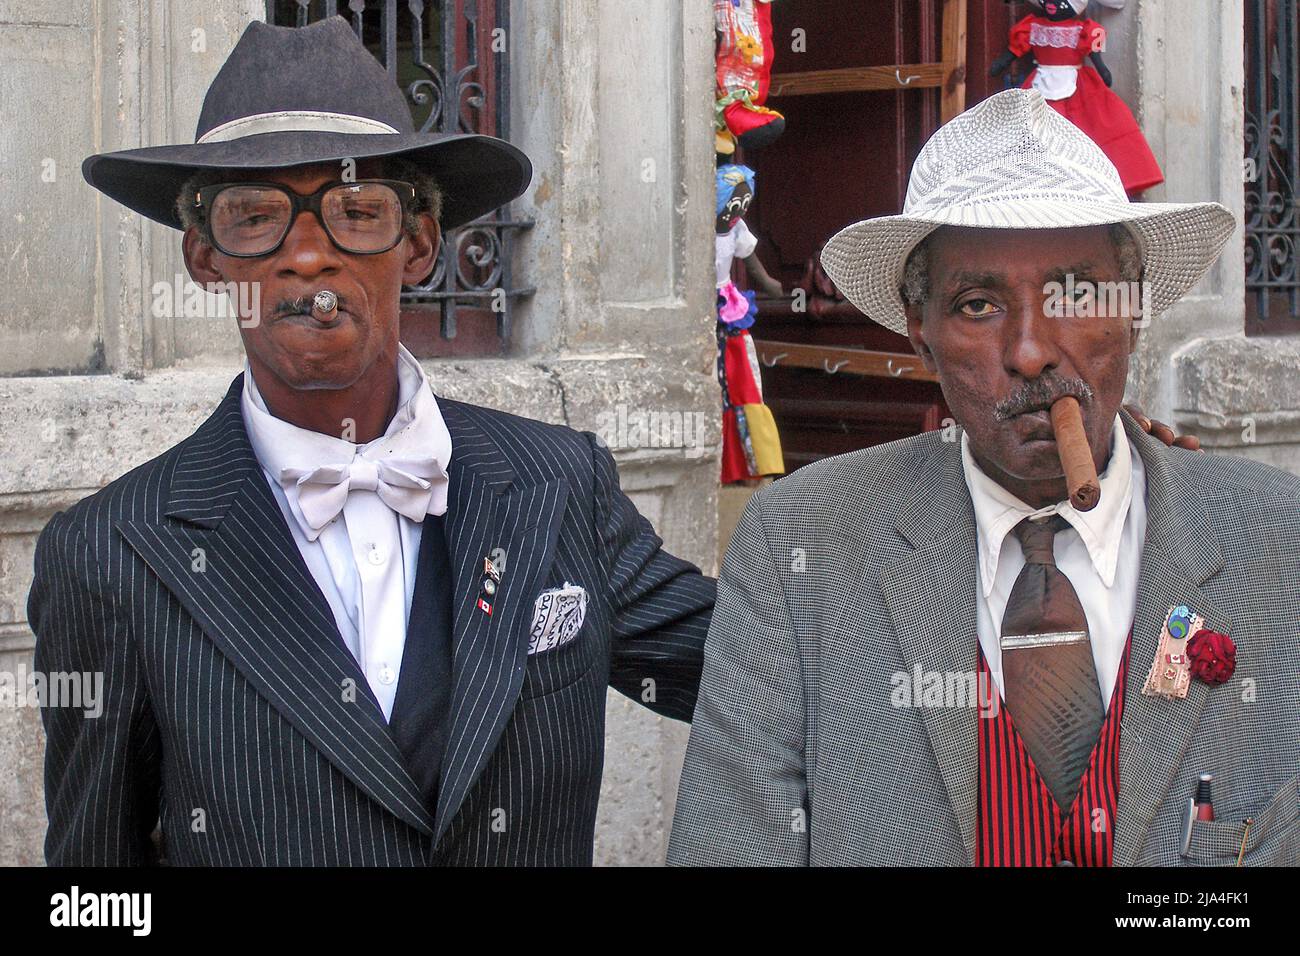 Two well dressed eldery cuban men smoking cigars, Cathedral Plaza, historic old town of Havana, Cuba, Caribbean Stock Photo